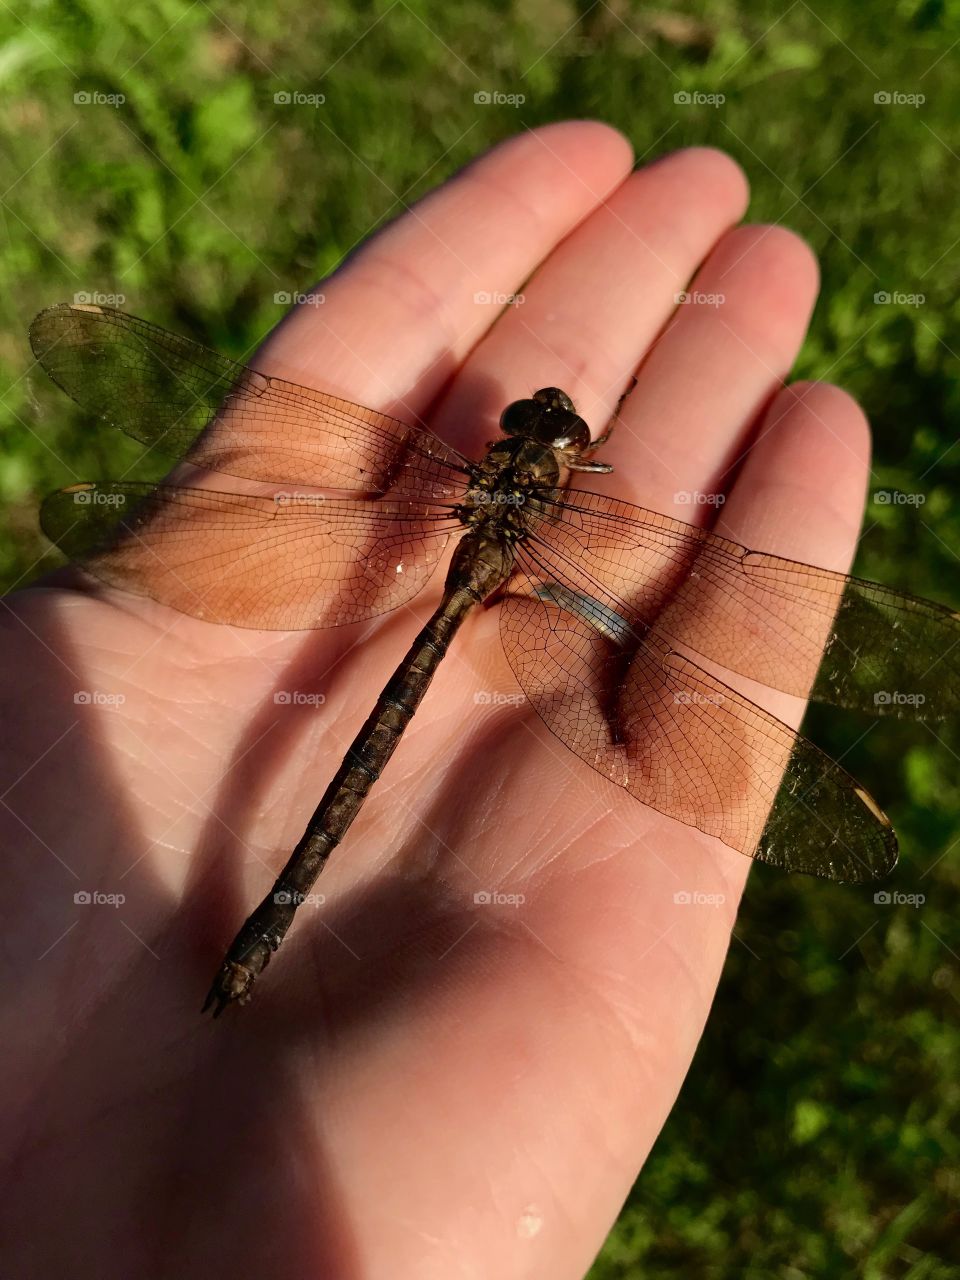 Dragonfly in my hand